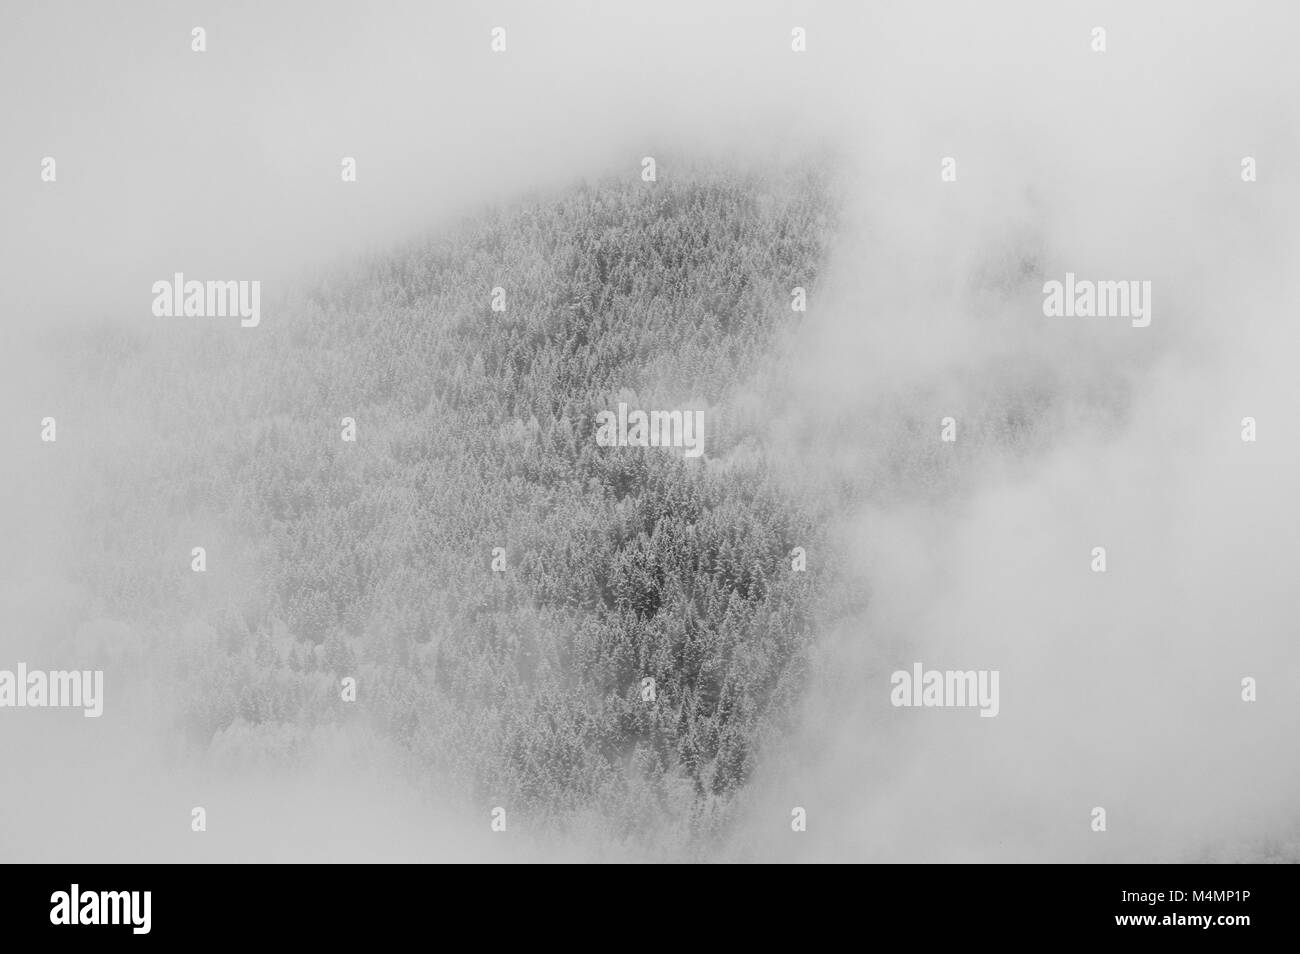 Mountainside with frost and snow covered trees surrounded by clouds and fog in monochrome. Stock Photo